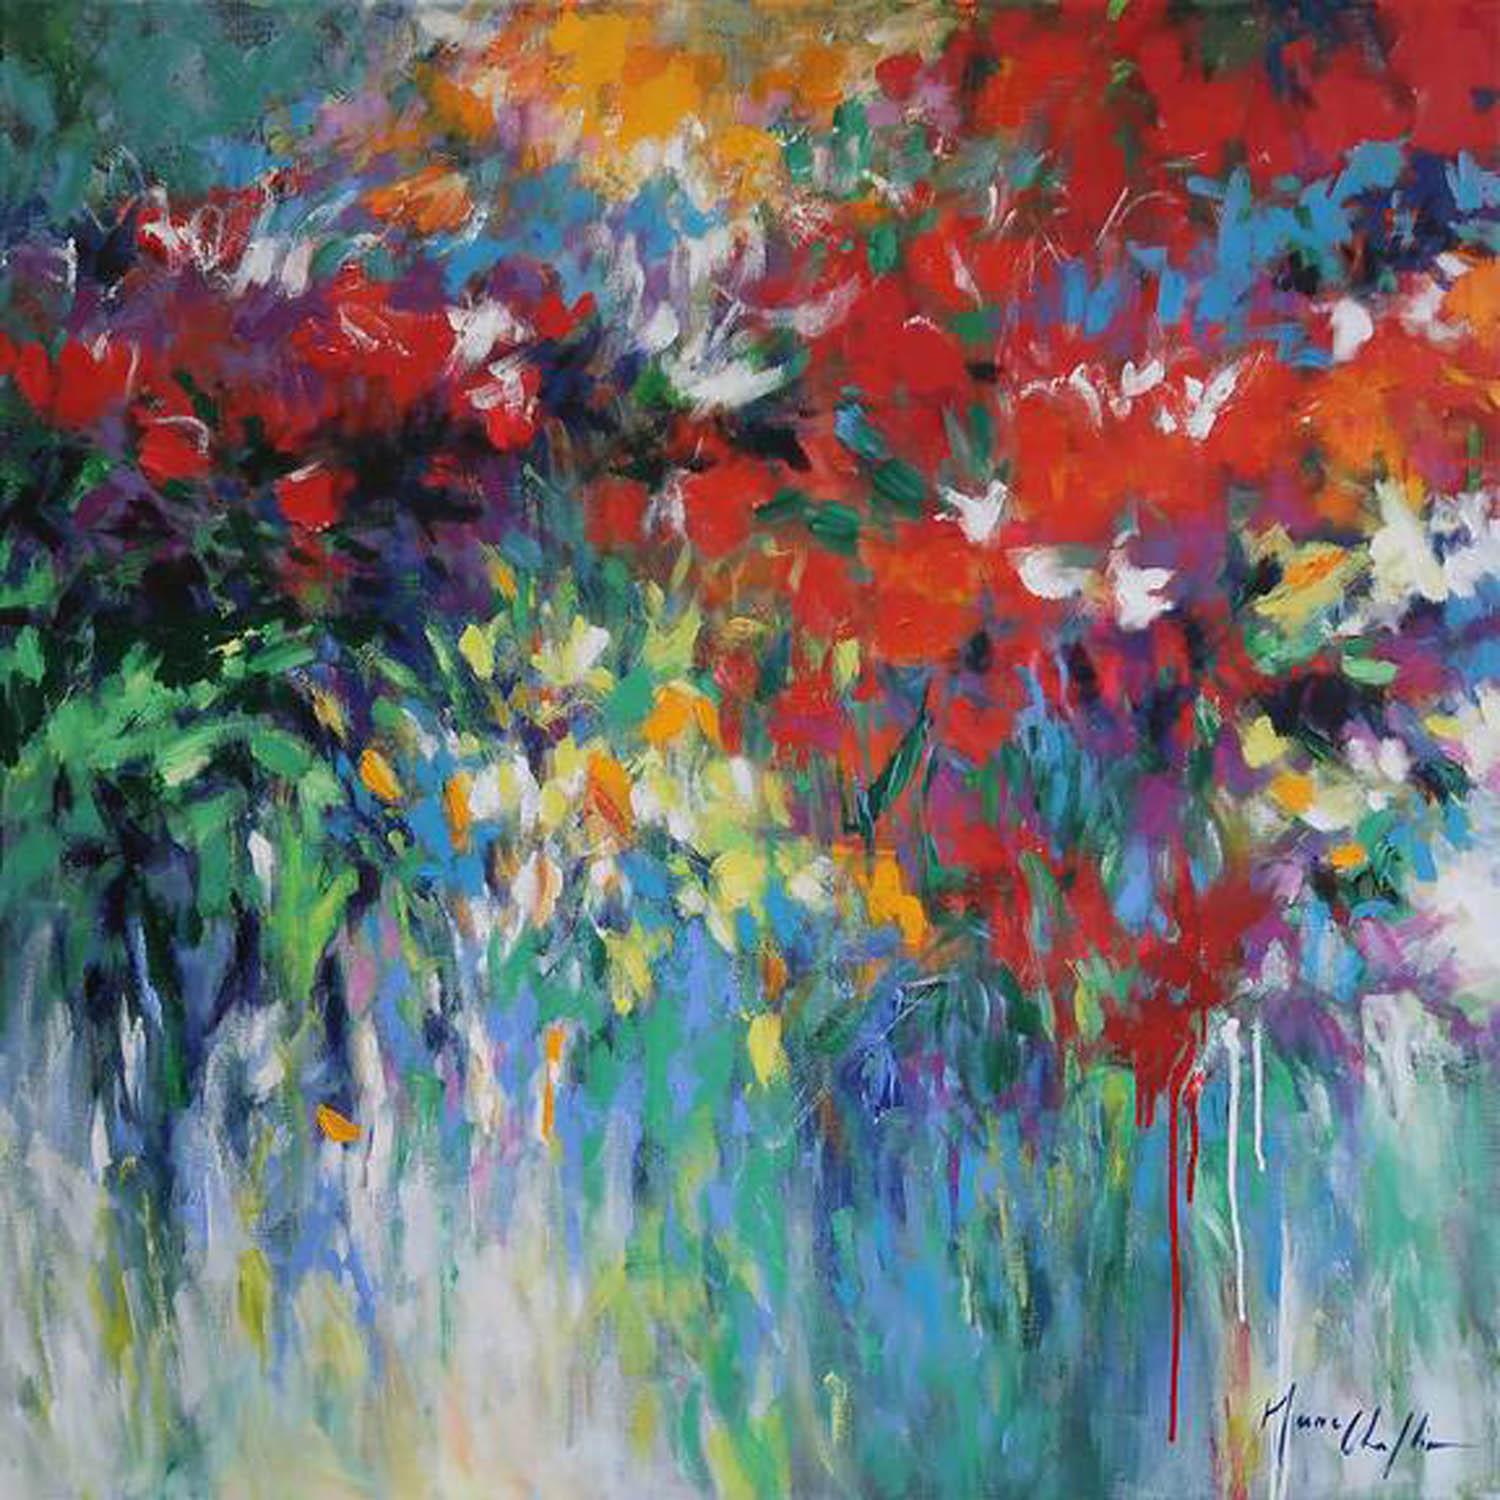 July in Picardie, by Mary Chaplin, acrylic on linen canvas. 80x80cm. Art work inspired by wild flowers, poppies growing in a field near my studio in Wailly. The painting is made with high quality paint. Not framed but ready to be hung.